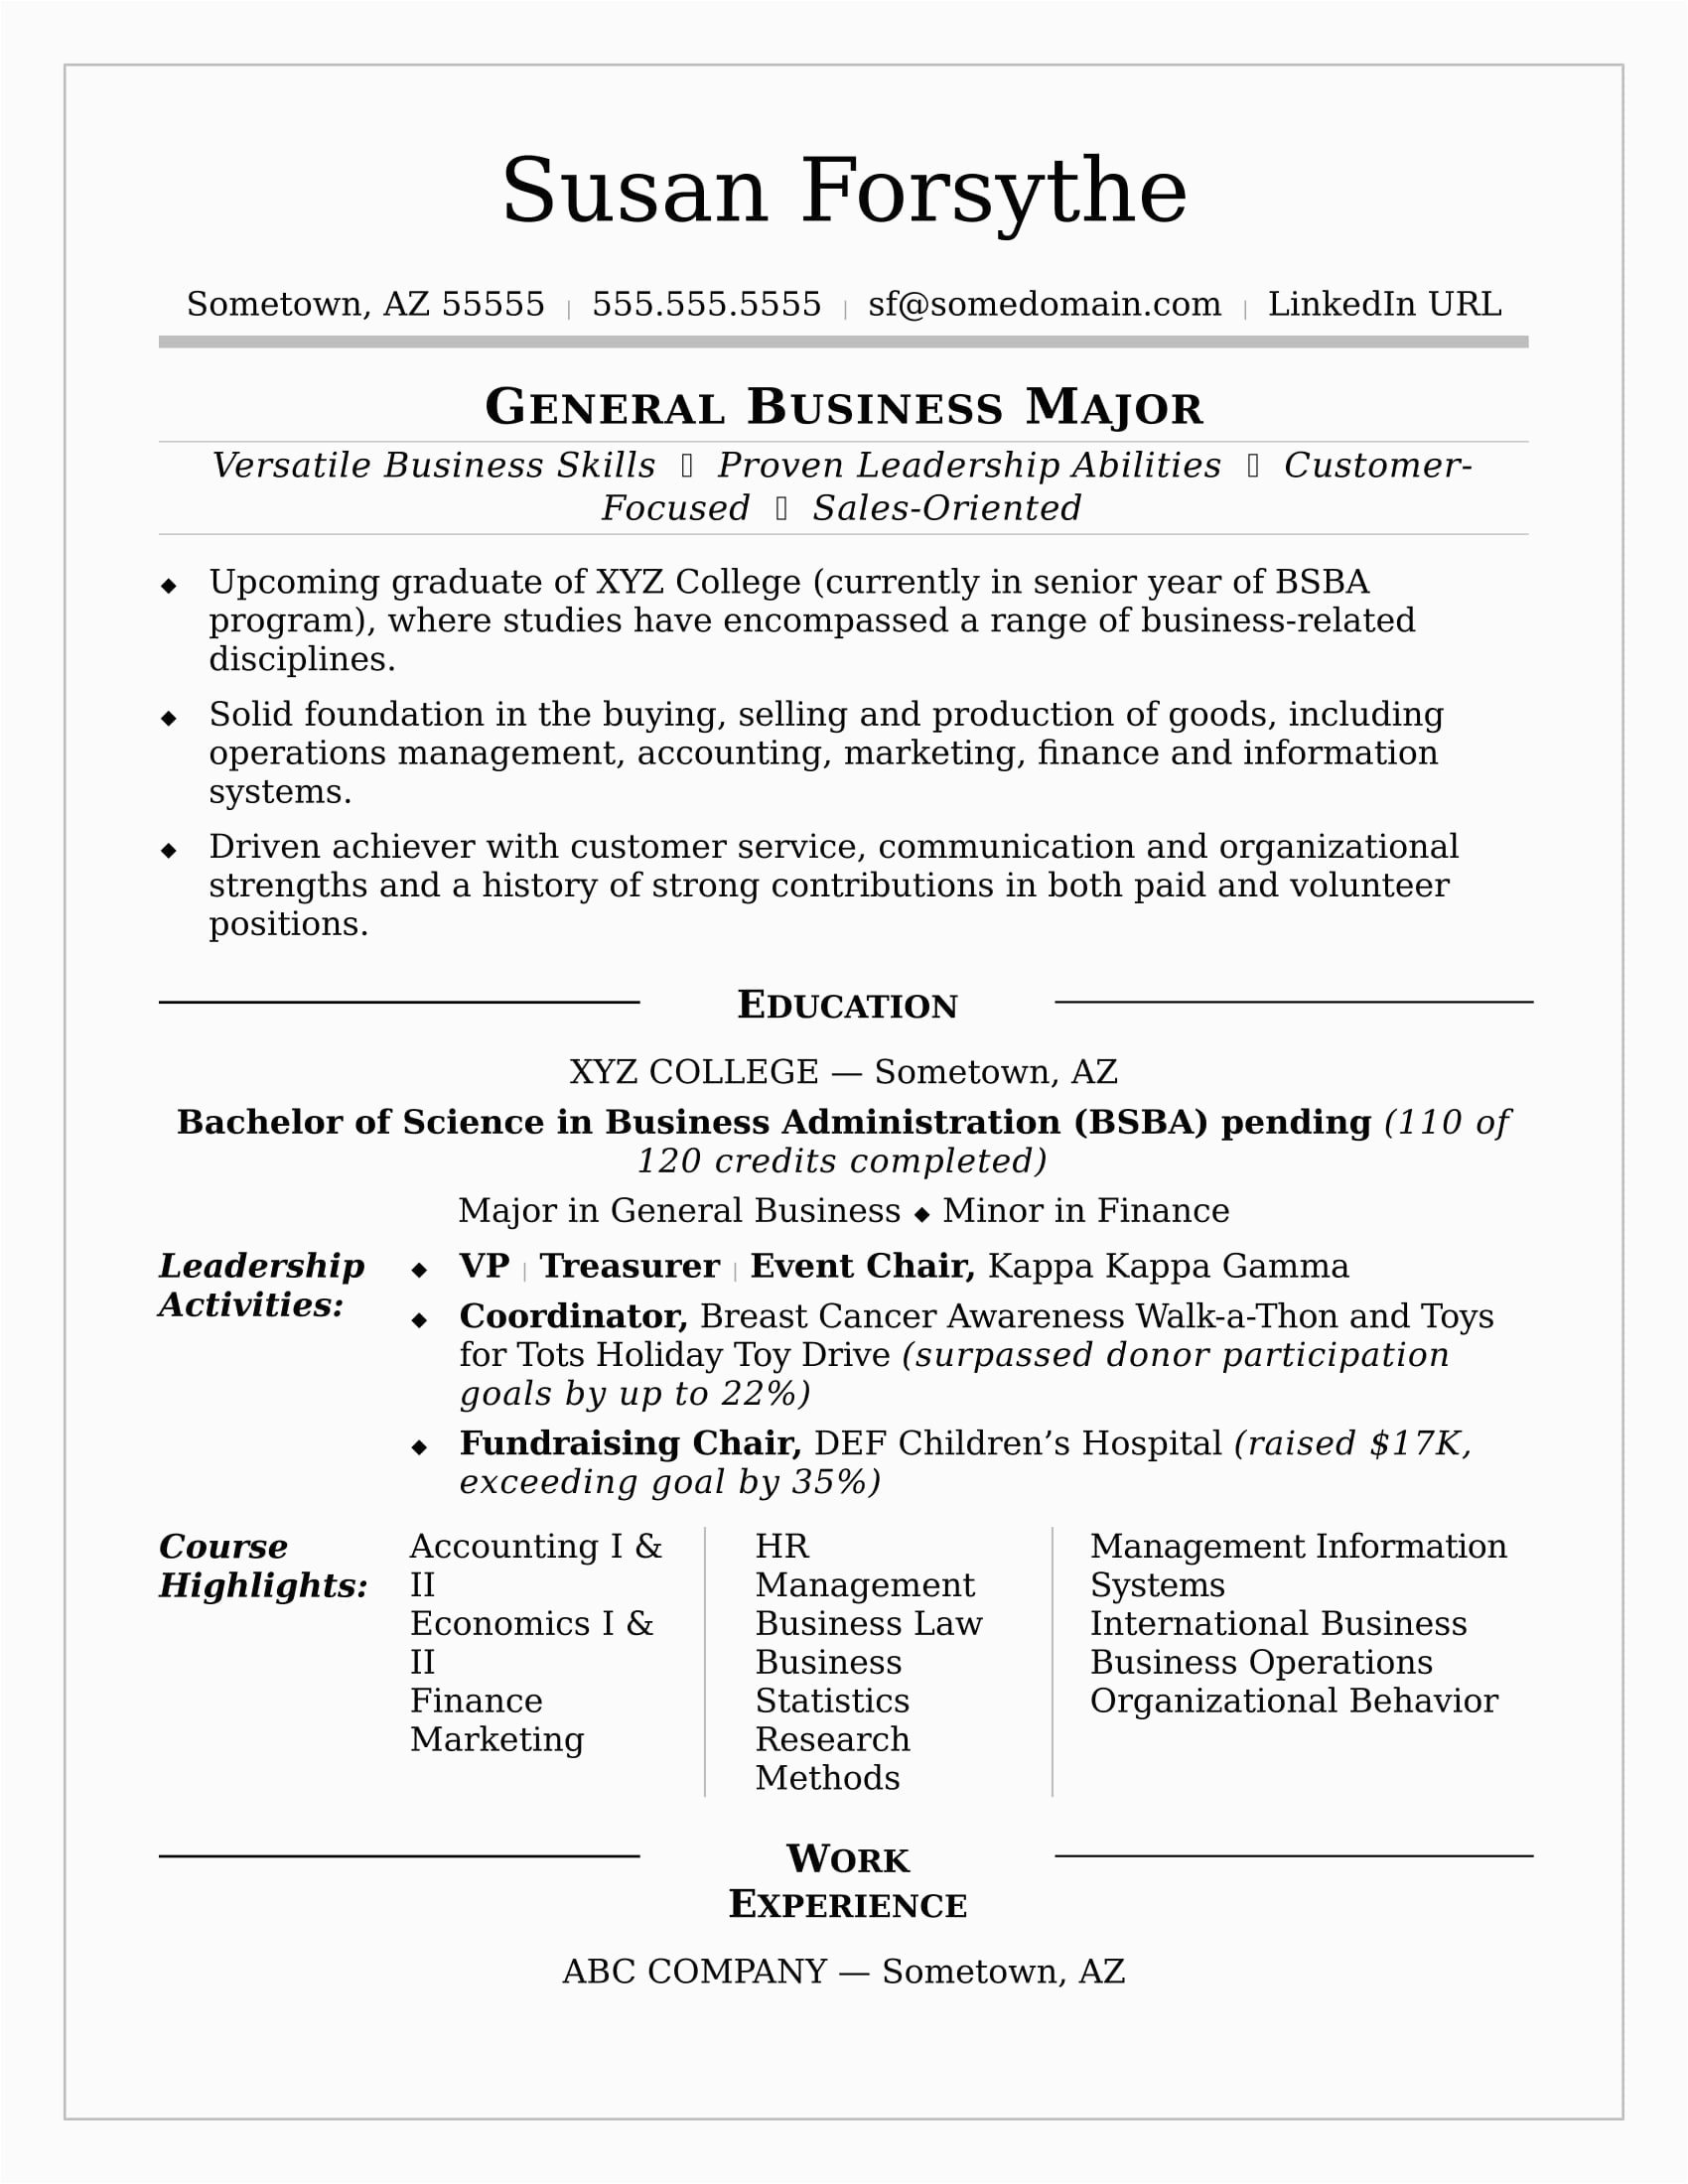 Resume Sample for New College Student College Graduate Resume 8 Reasons This is An Excellent Resume for A